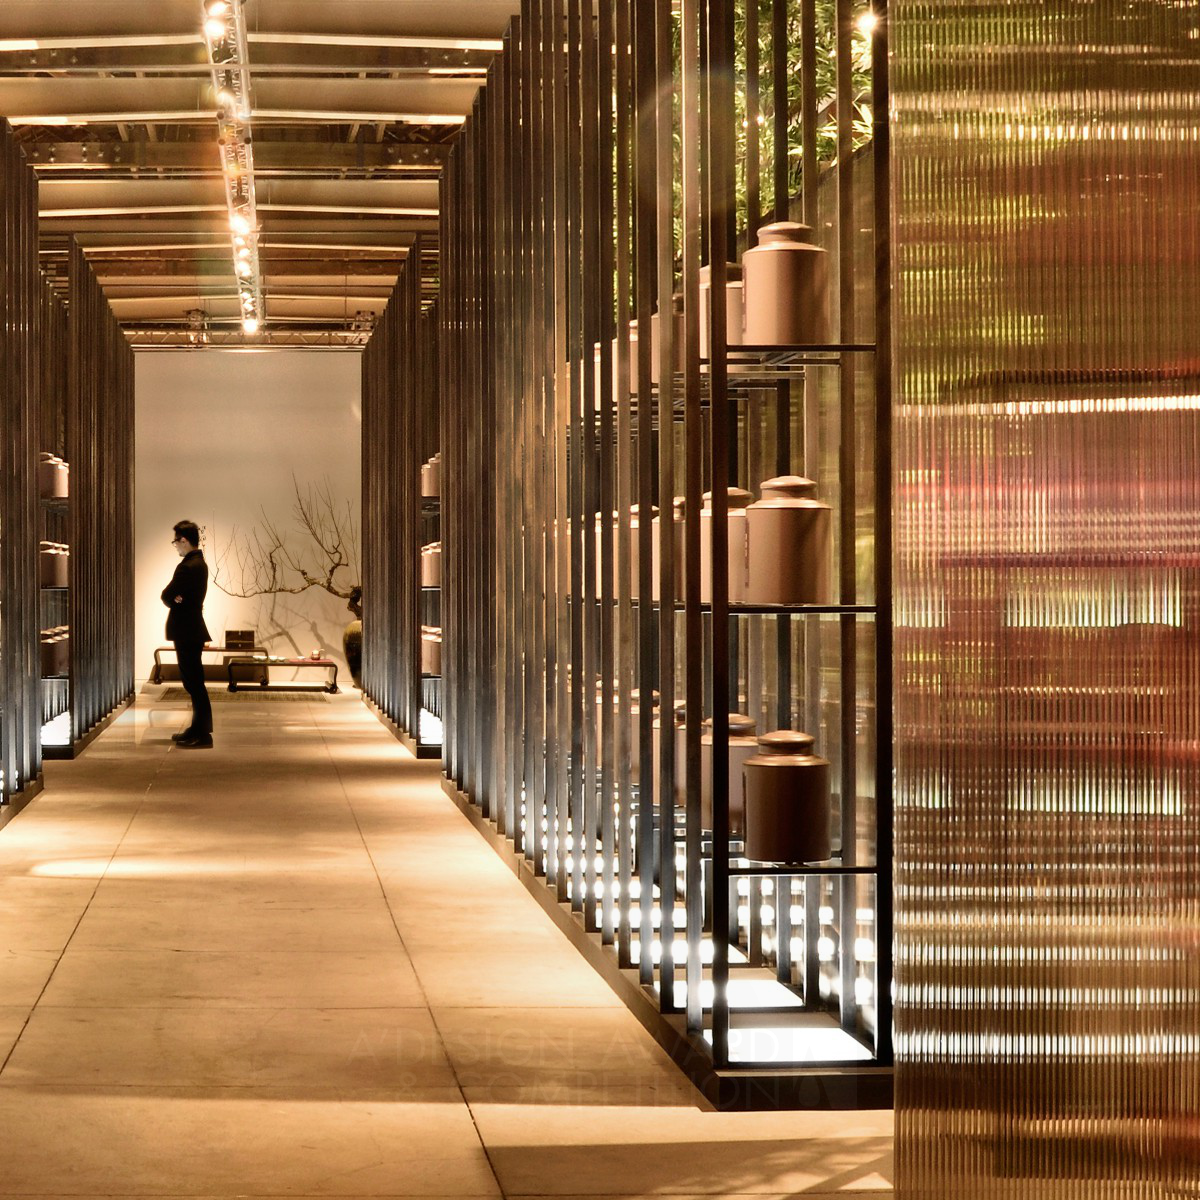 Misty Bamboo Exhibition Space by KYDO